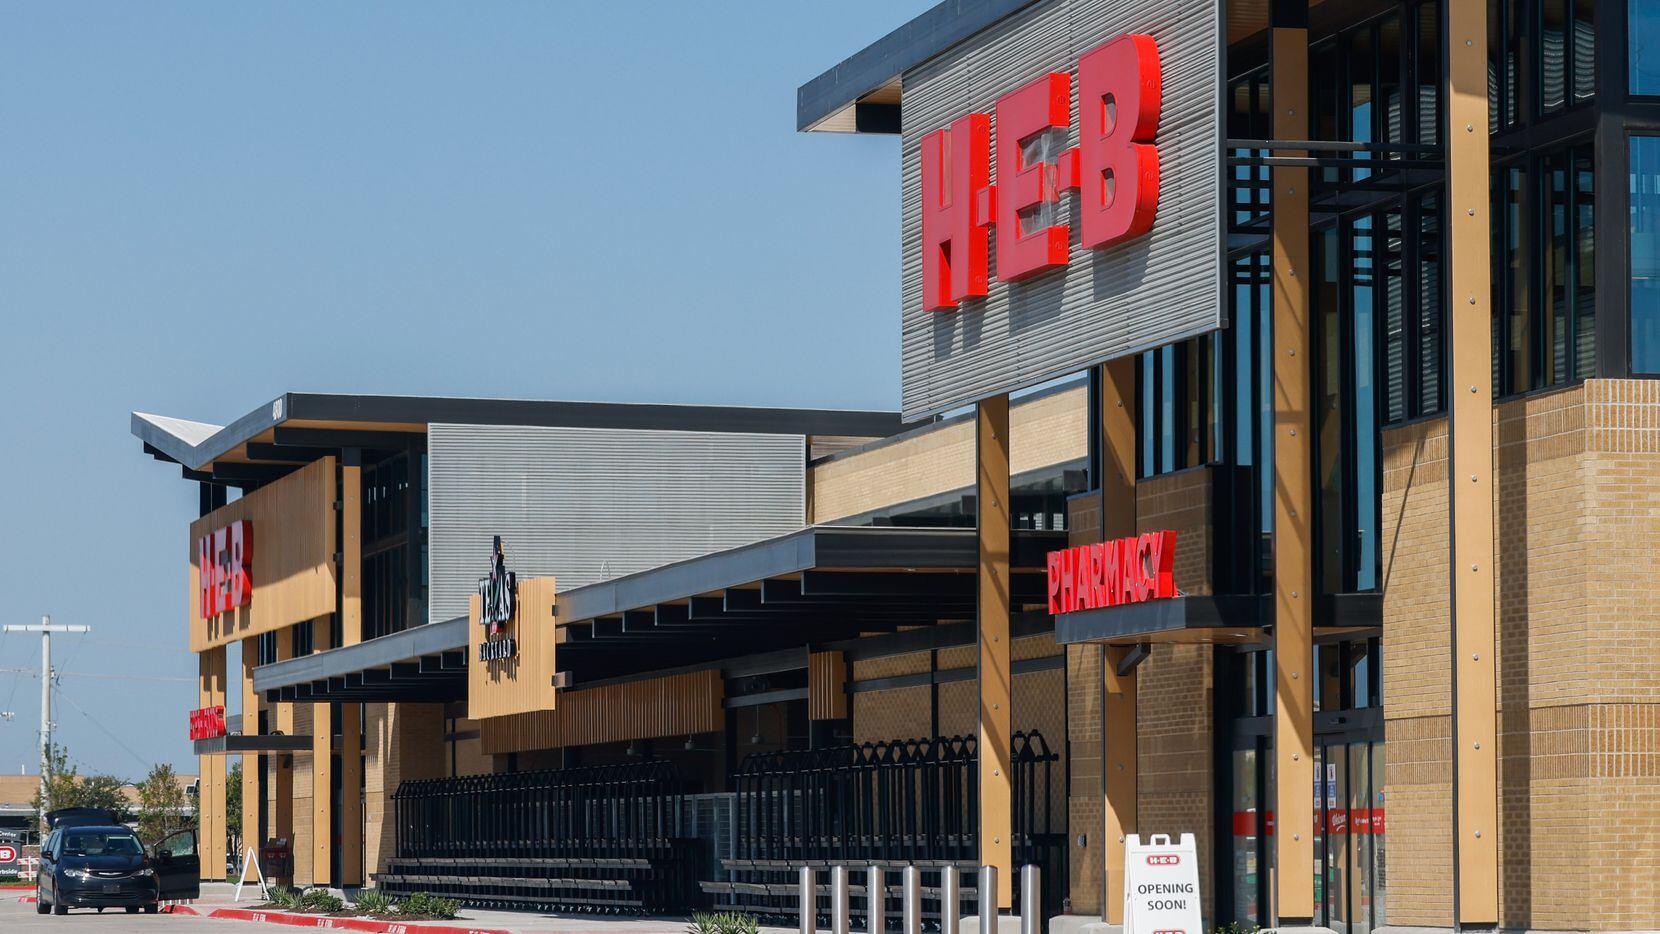 This H-E-B in Frisco at 4800 Main Street is 111,000 square feet. It has the San...